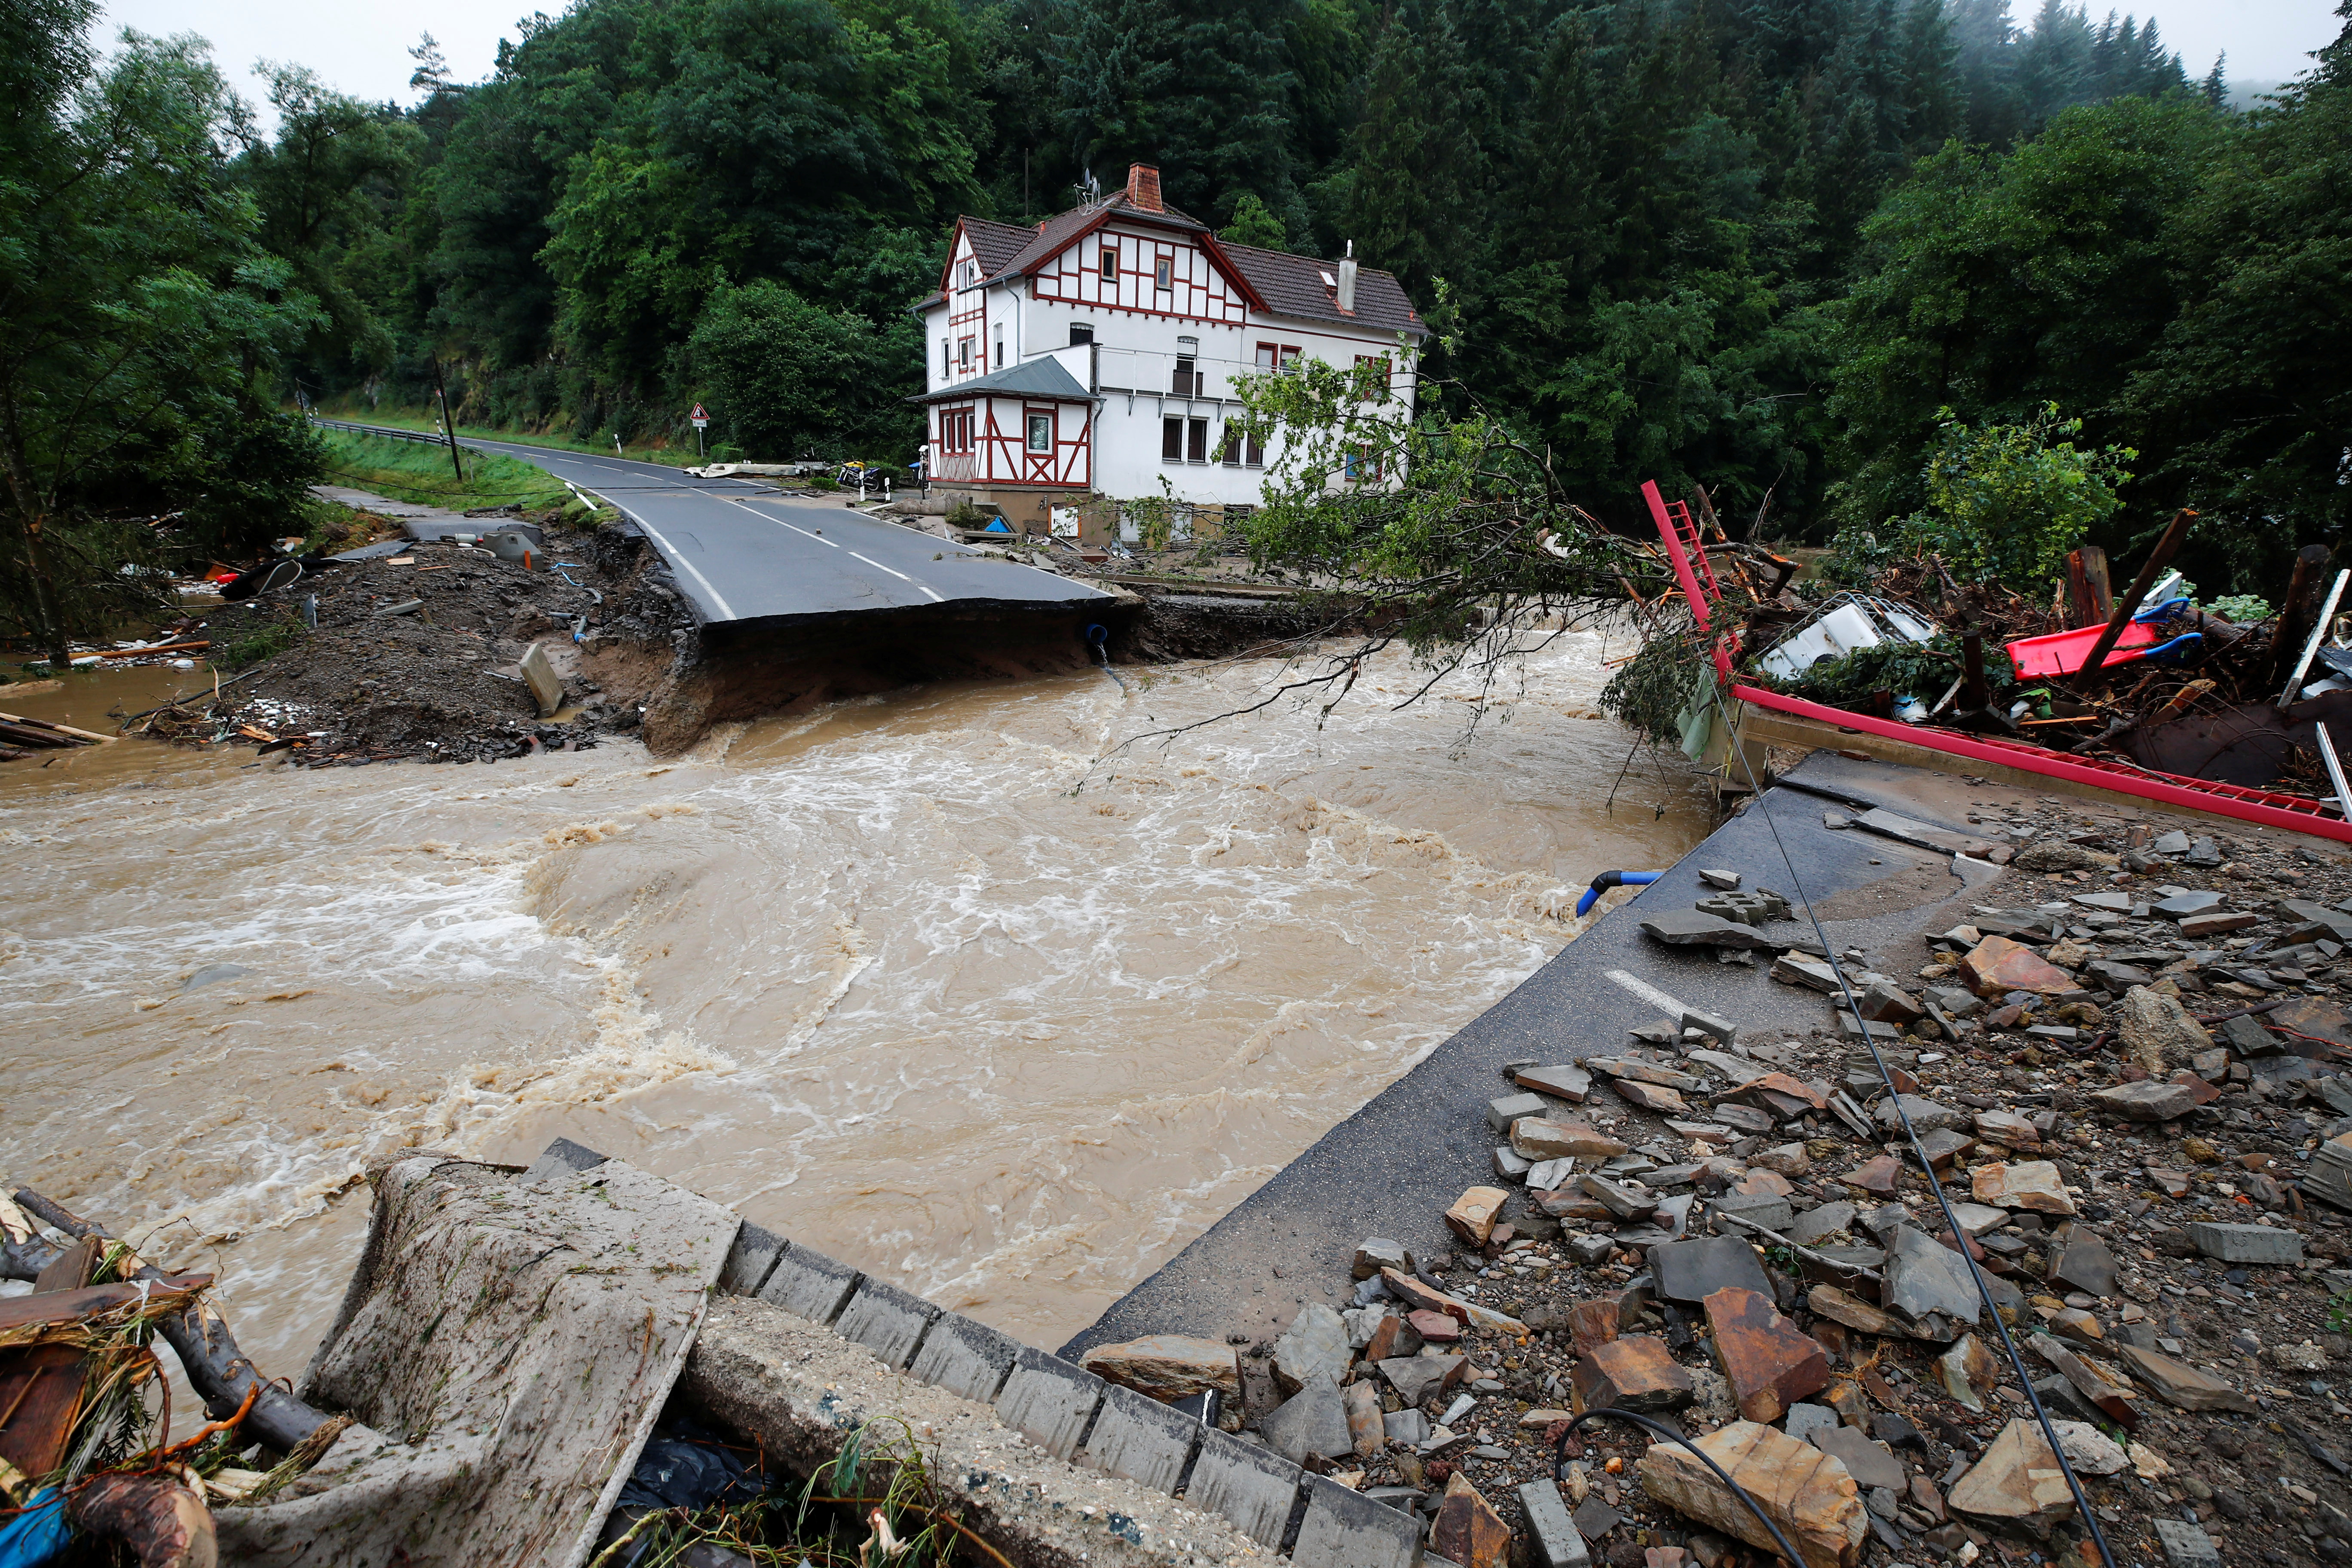 A destroyed road next to the Ahr river is seen on a flood-affected area following heavy rainfalls in Schuld, Germany, on July 15, 2021. REUTERS/Wolfgang Rattay